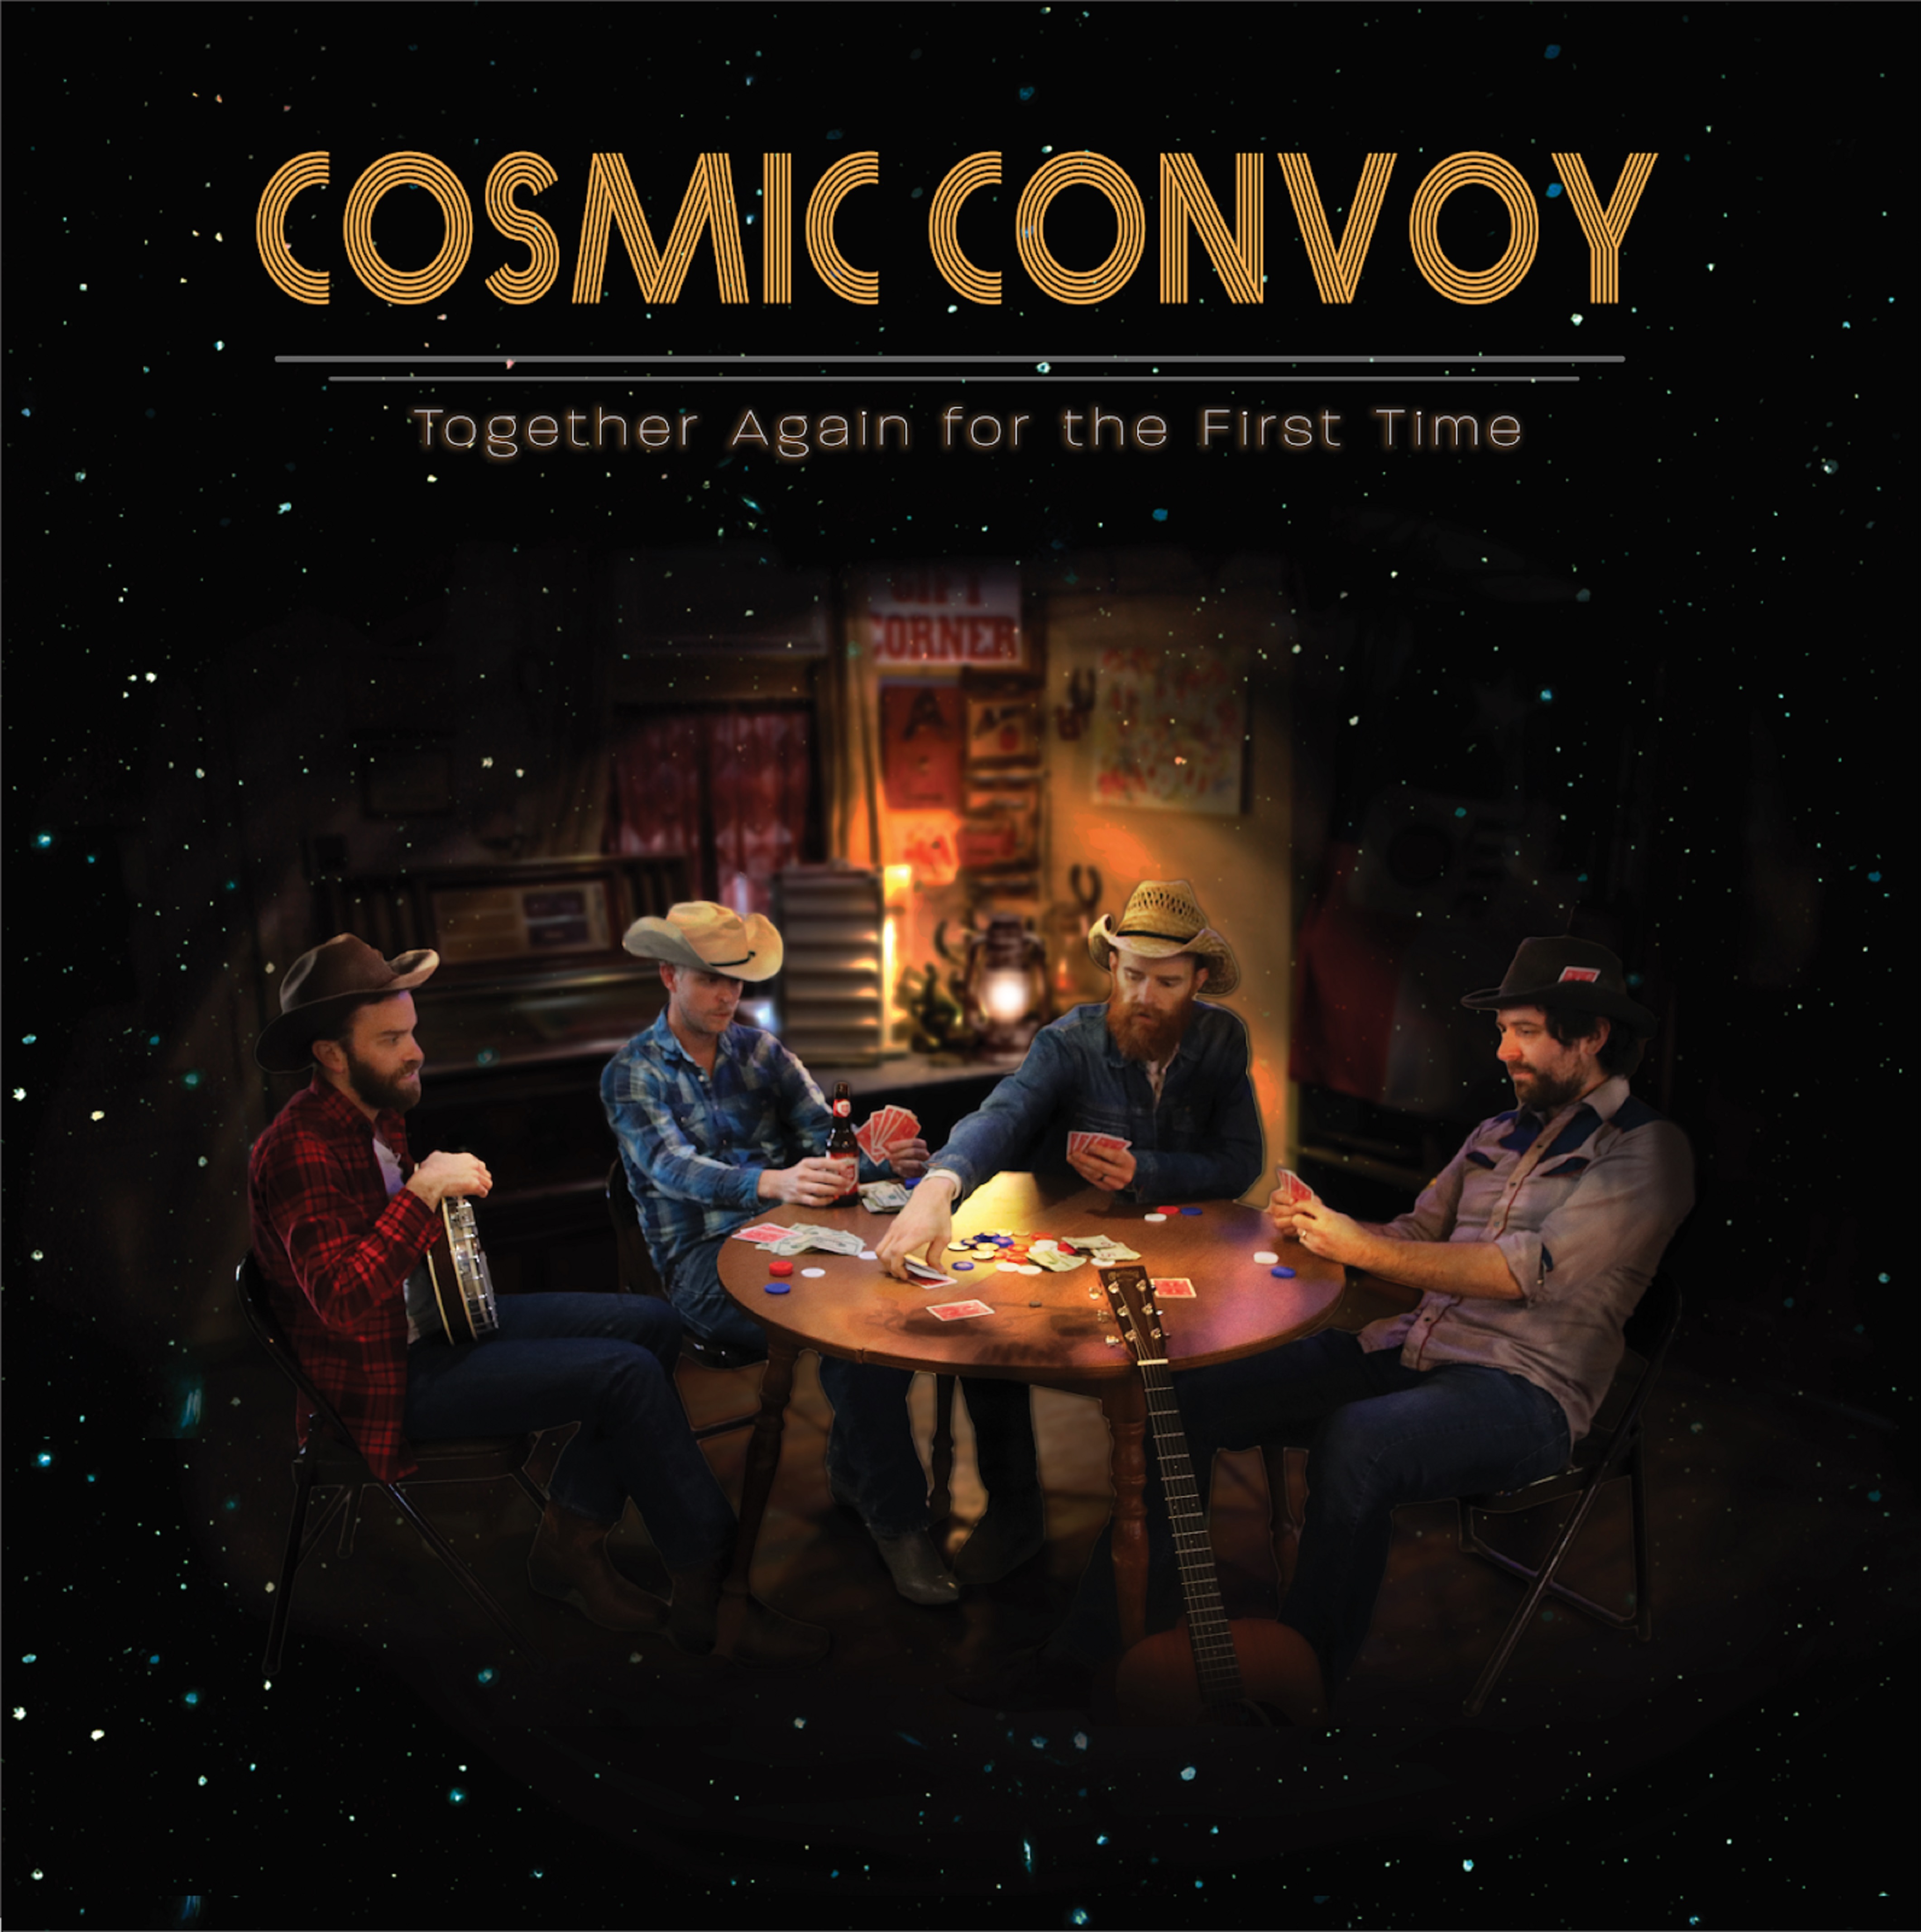 COSMIC CONVOY Together Again for the First Time